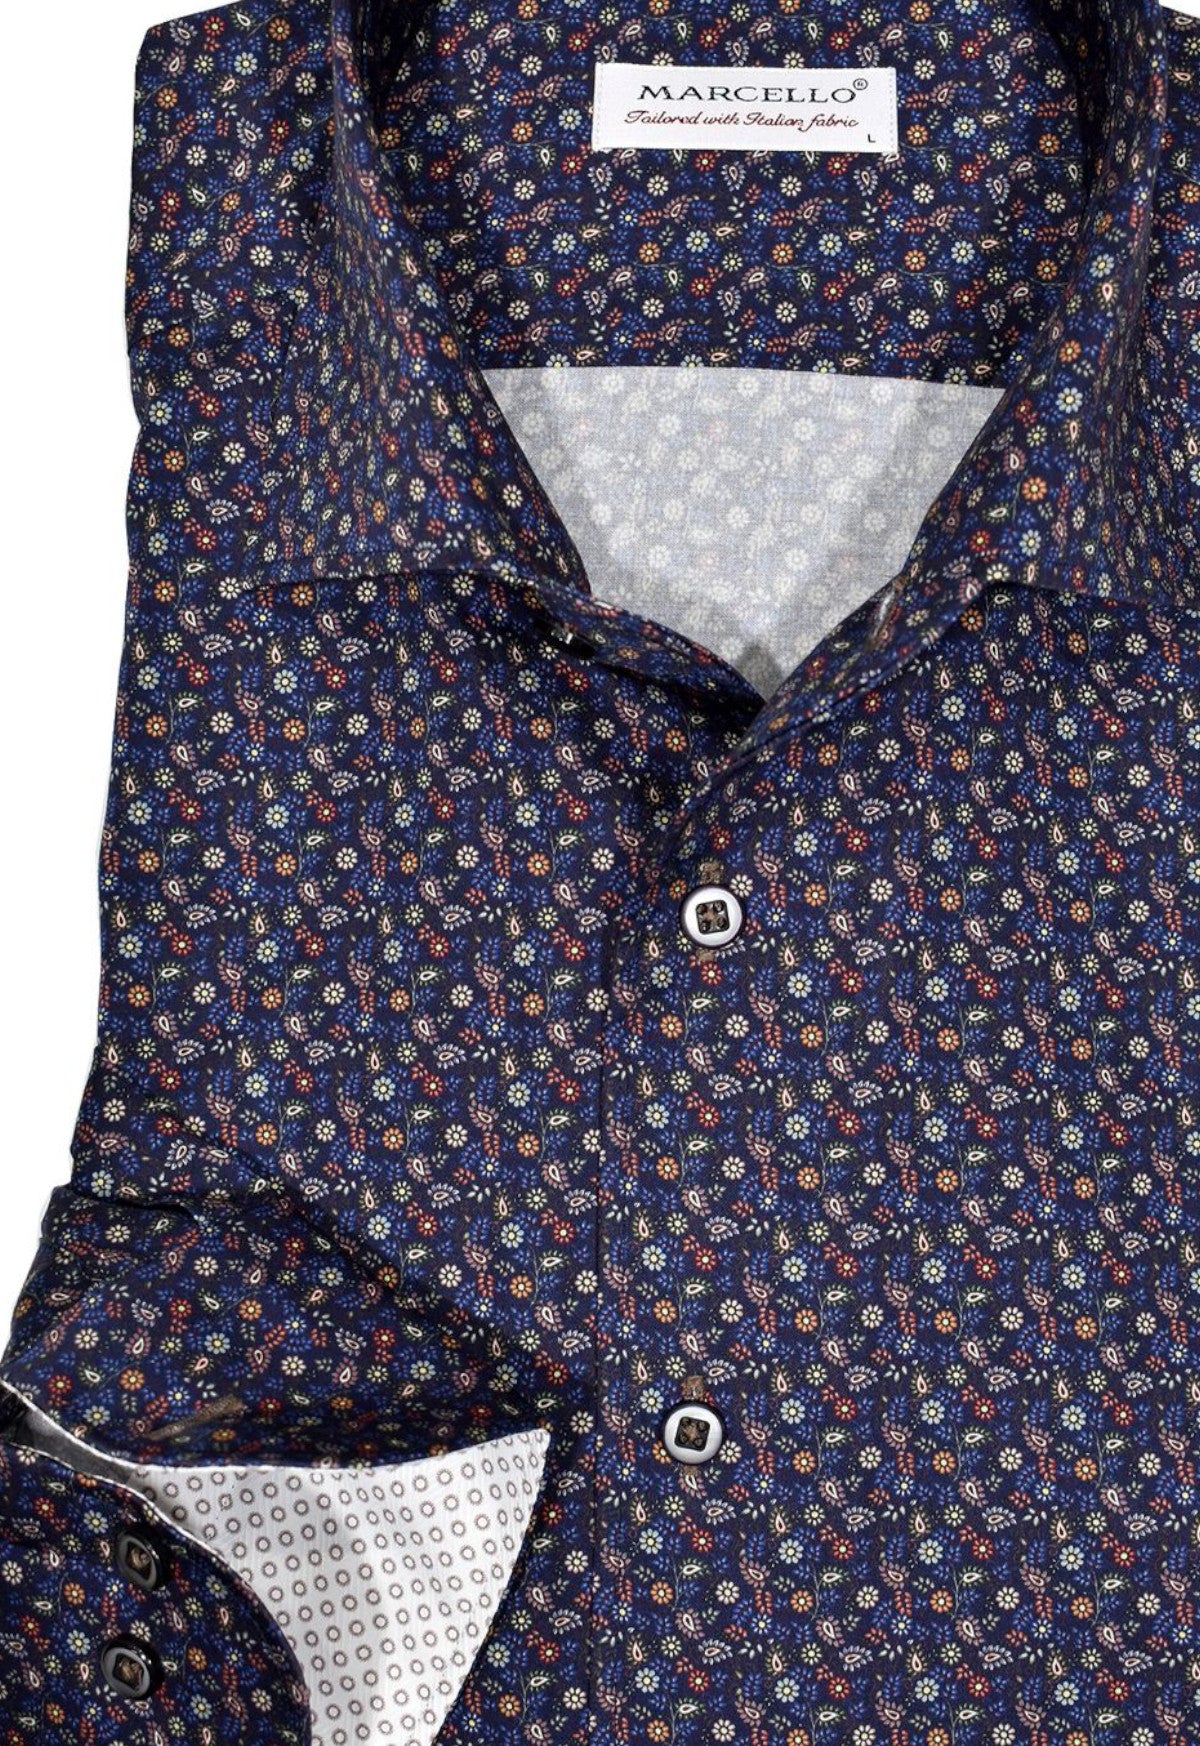 Exclusive Marcello 1 Piece Roll Collar Shirt.  The one piece roll collar stands perfectly and looks fantastic alone or under a sport coat.  The multi navy paisley pattern coupled with a rich fabric creates a sophisticated look to set your apart from the rest.  Hand selected buttons, two button cuff placket for the best look when rolling up the cuffs and enhanced stitch detailing.  Classic shaped fit.